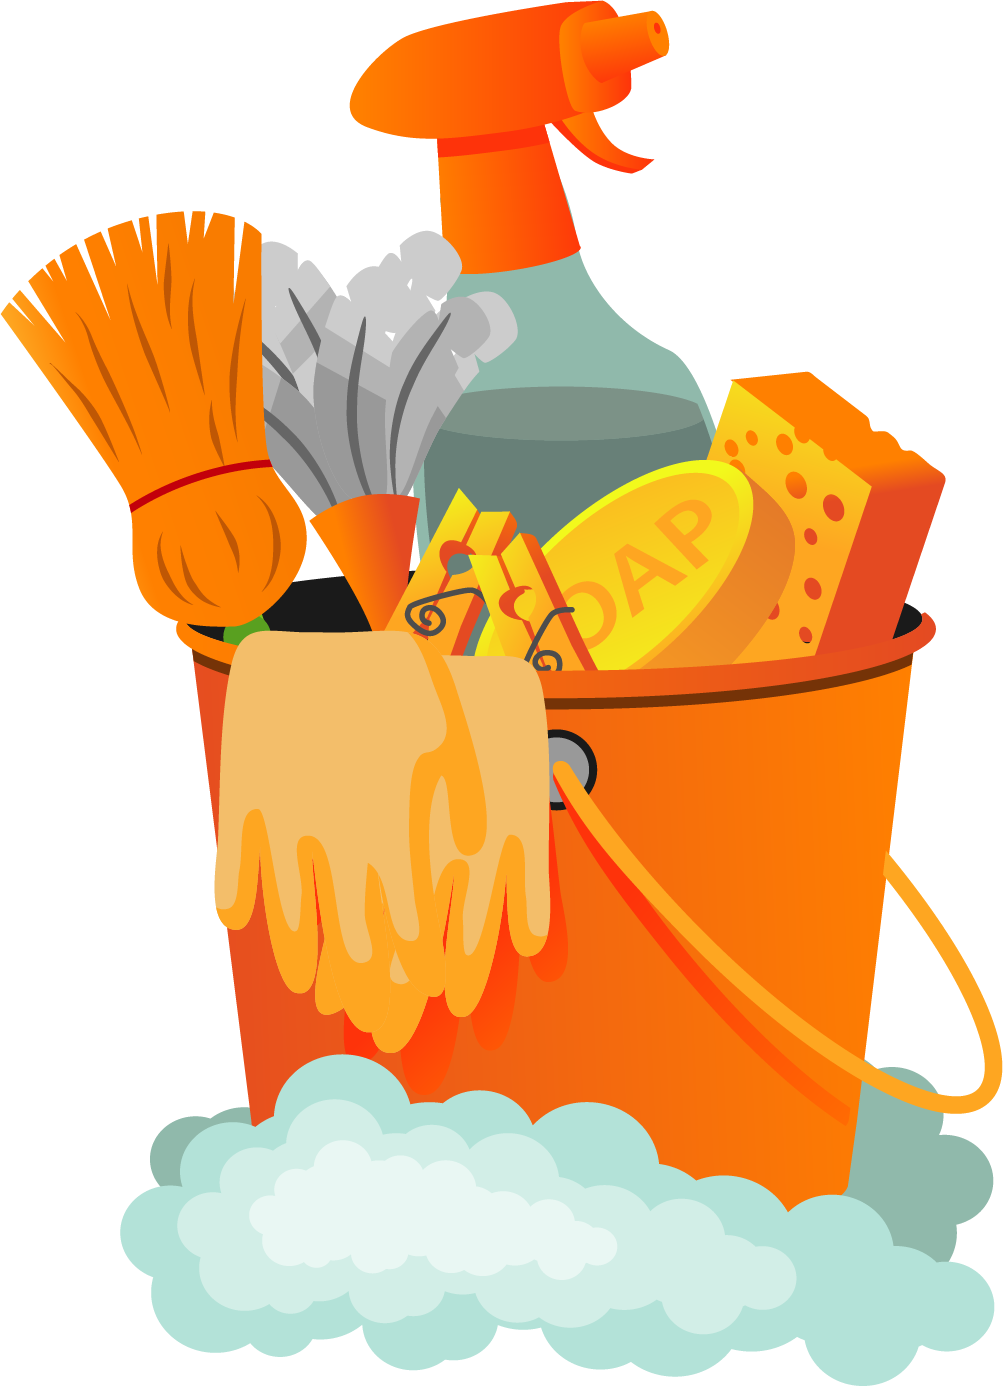 Download and share clipart about Spring Cleaning Clip Art - Spring Cleaning ...